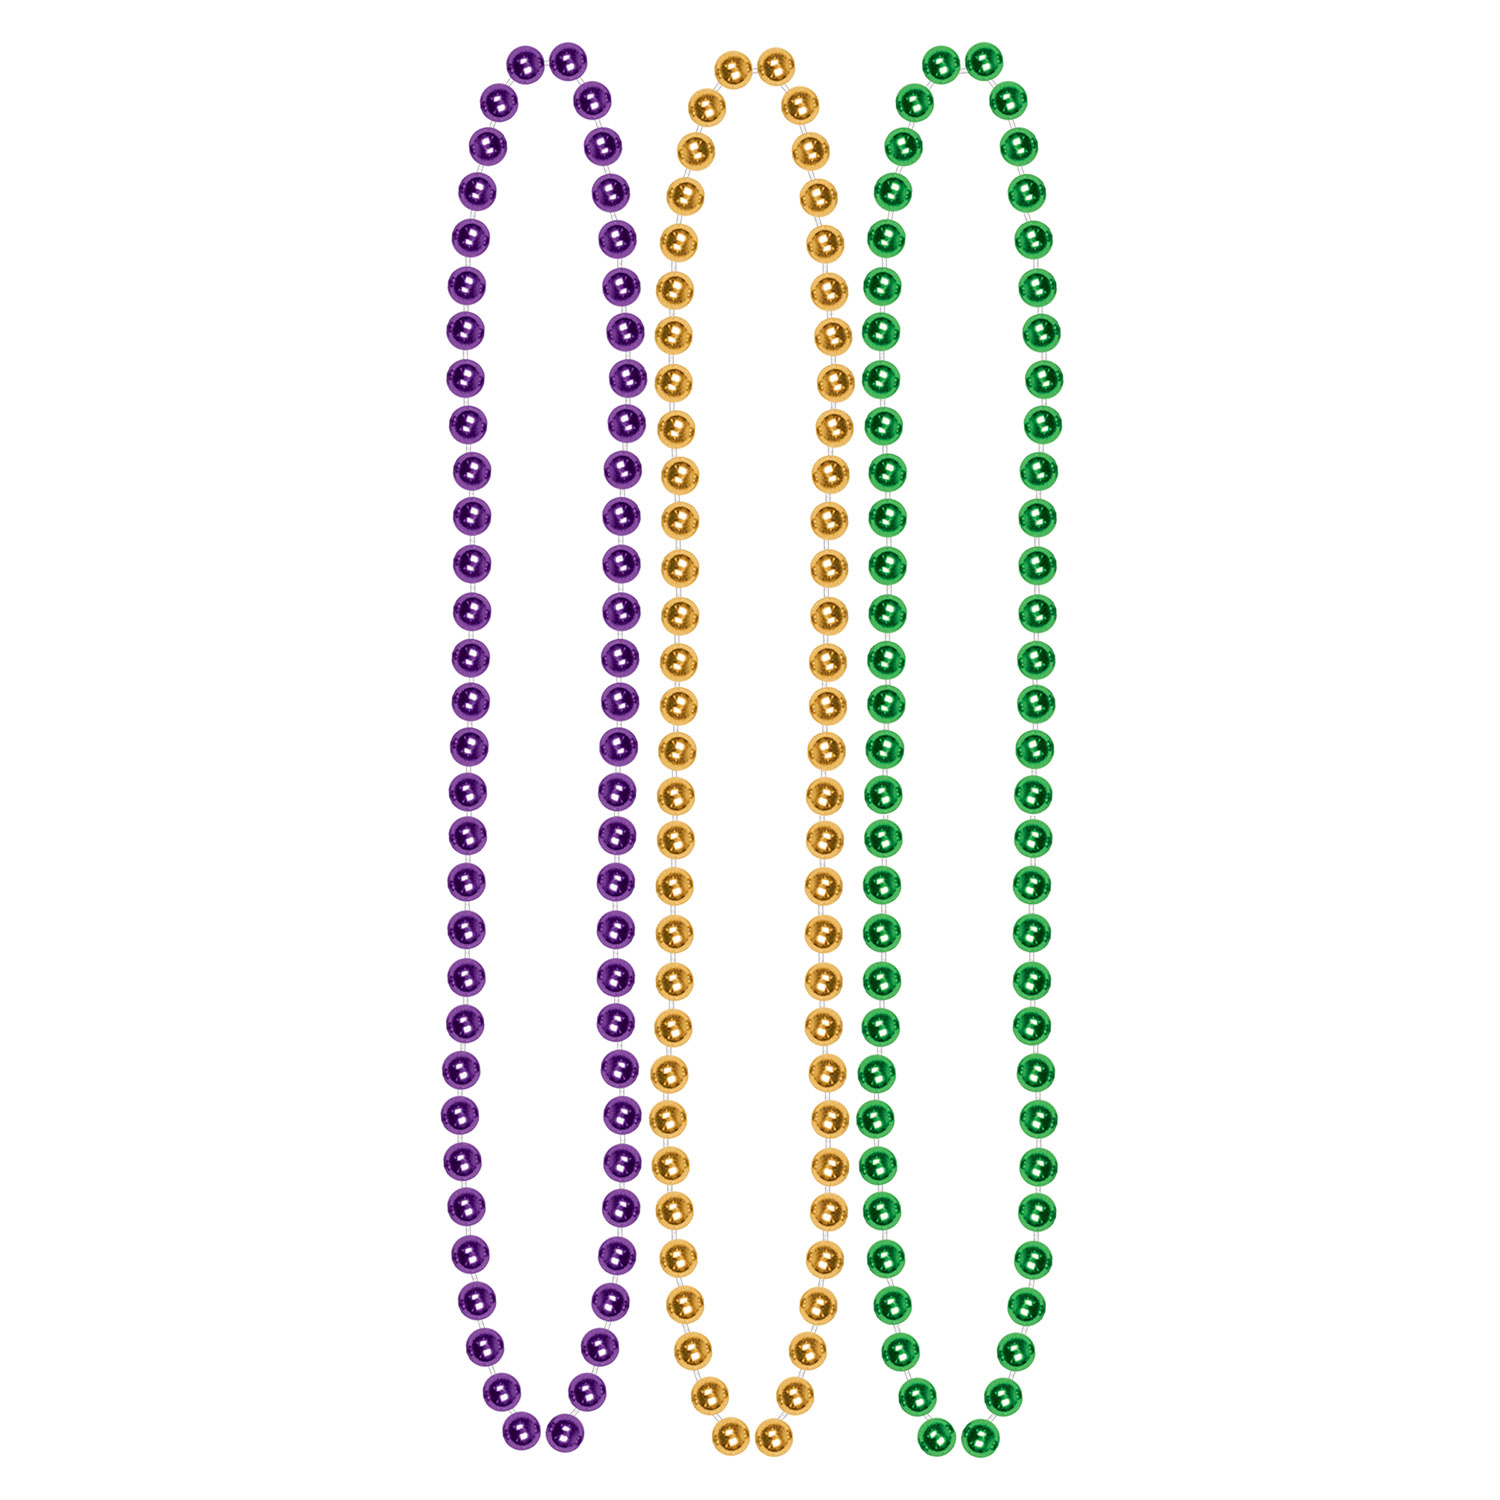 Mardi Gras Beads in Traditional Purple, Green, and Gold Colors